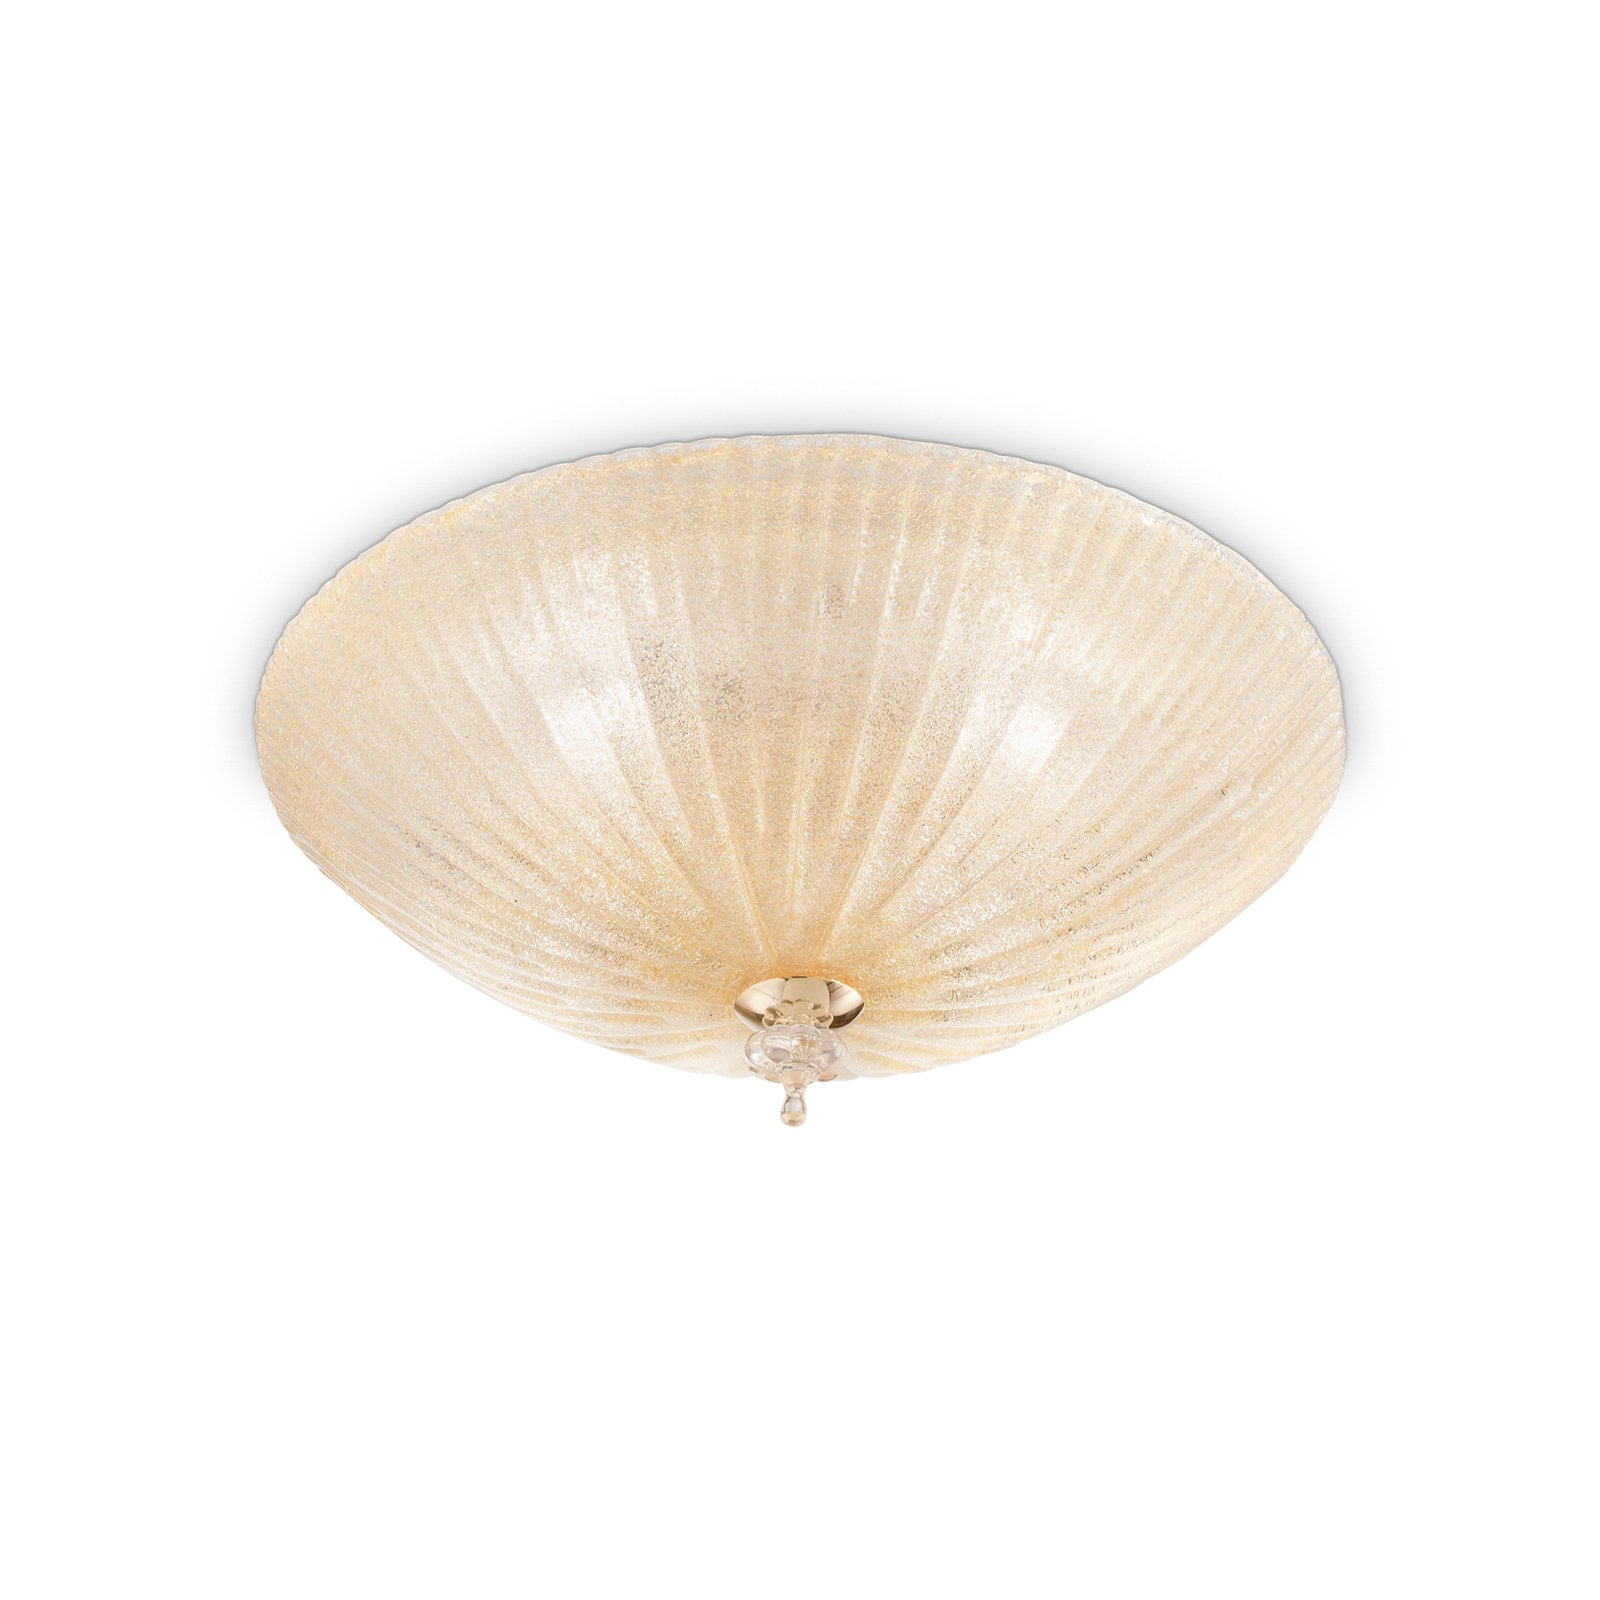 Ideal Lux Shell ceiling light, amber-coloured, glass, Ø 50 cm